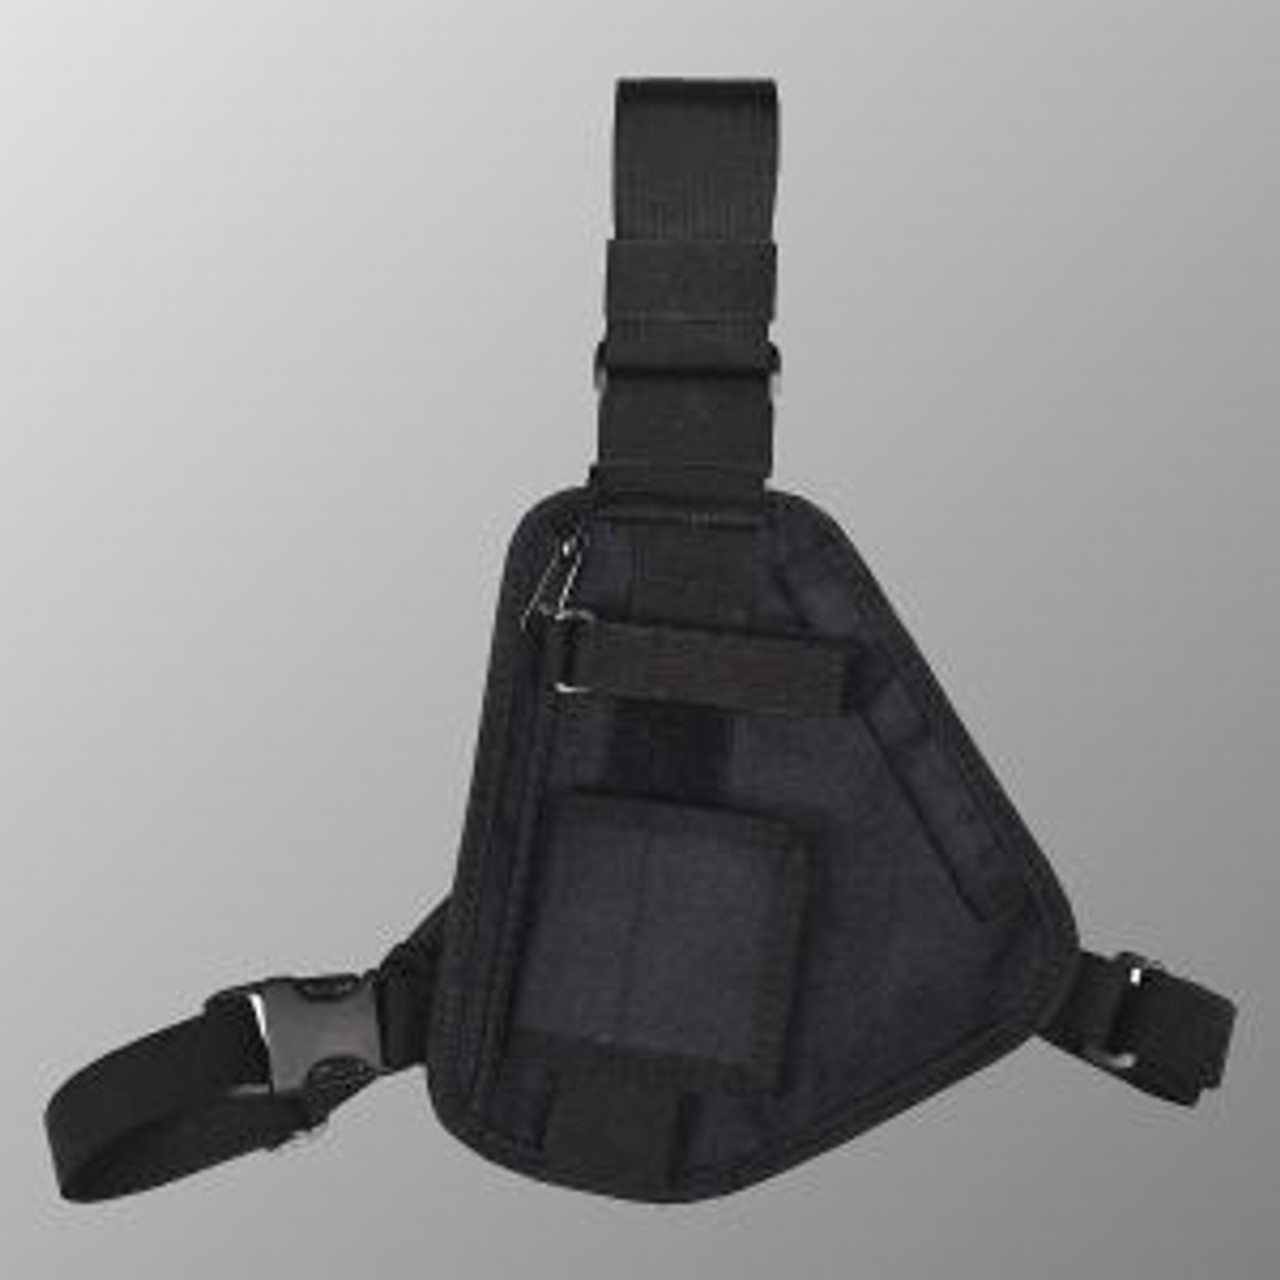 Motorola XPR7000 Series 3-Point Chest Harness - Black